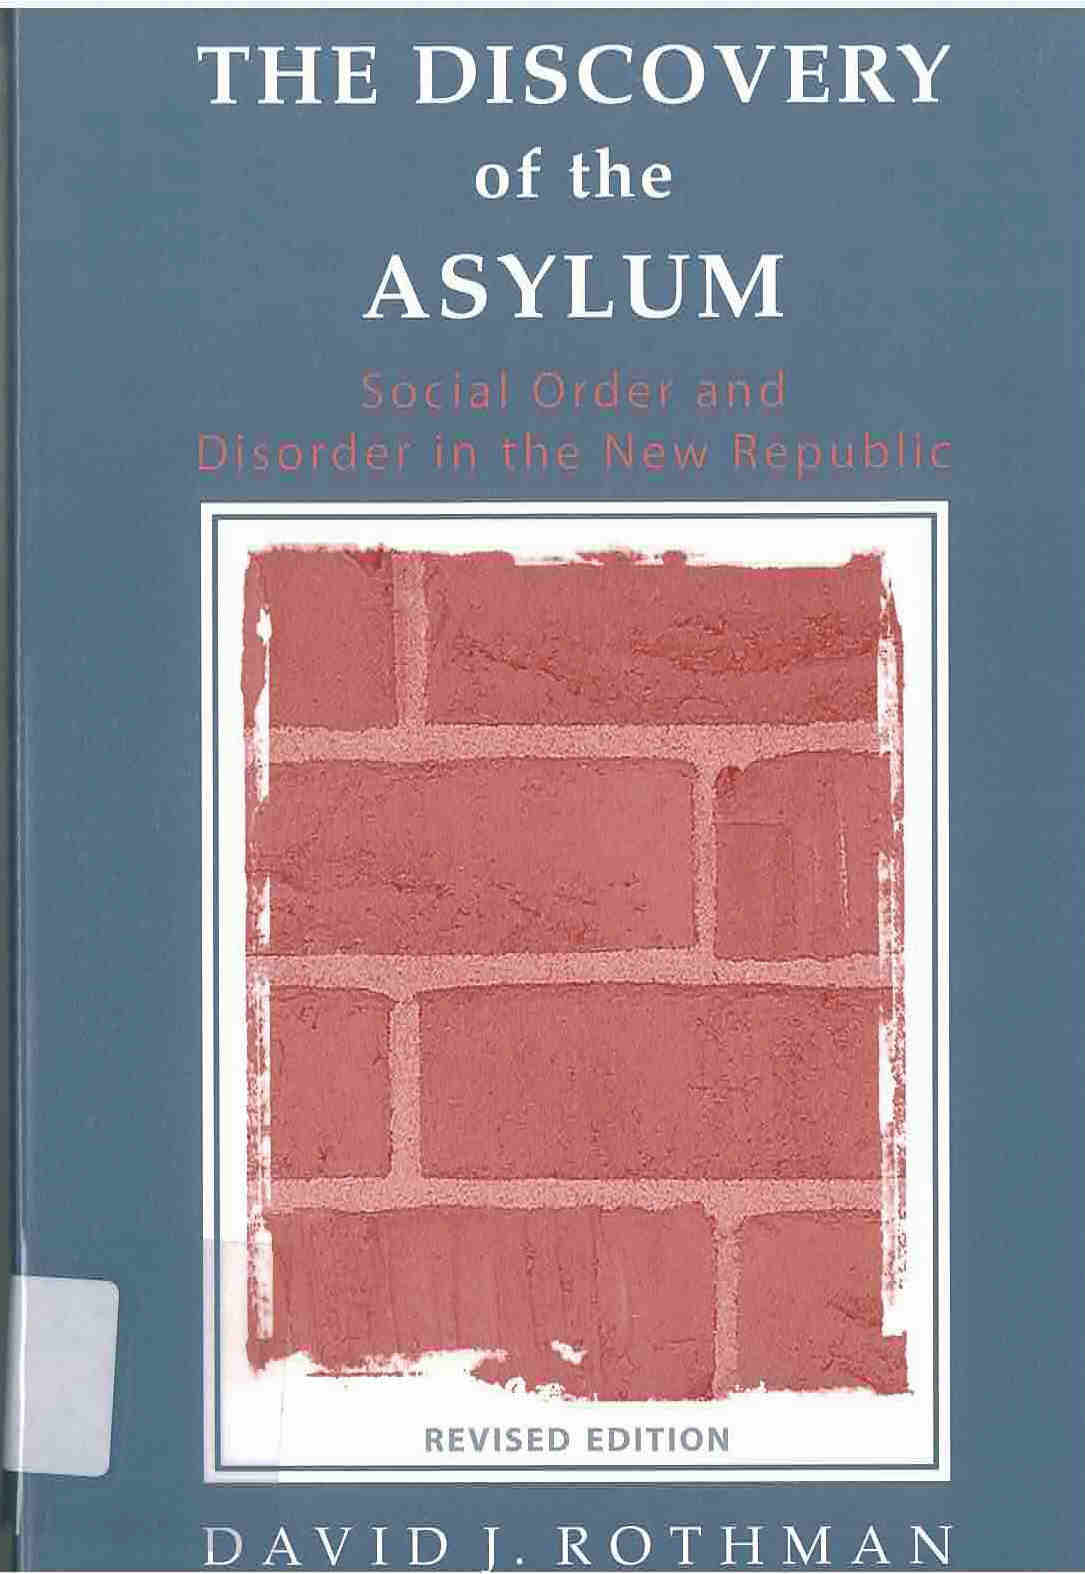 The discovery of the asylum : social order and disorder in the new Republic